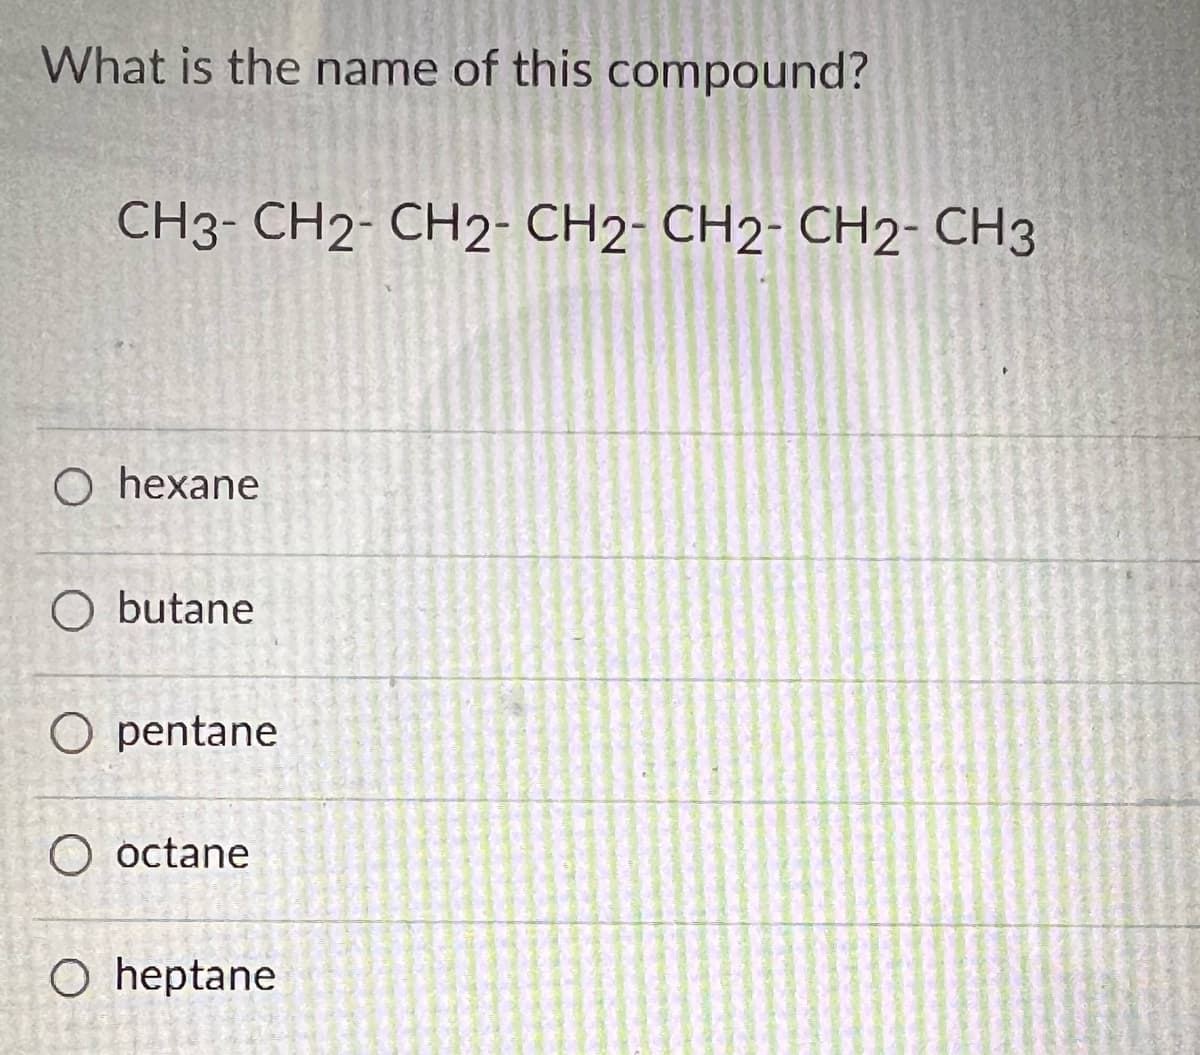 What is the name of this compound?
CH3-CH2-CH2-CH2- CH2- CH2 - CH3
O hexane
O butane
O pentane
O octane
O heptane